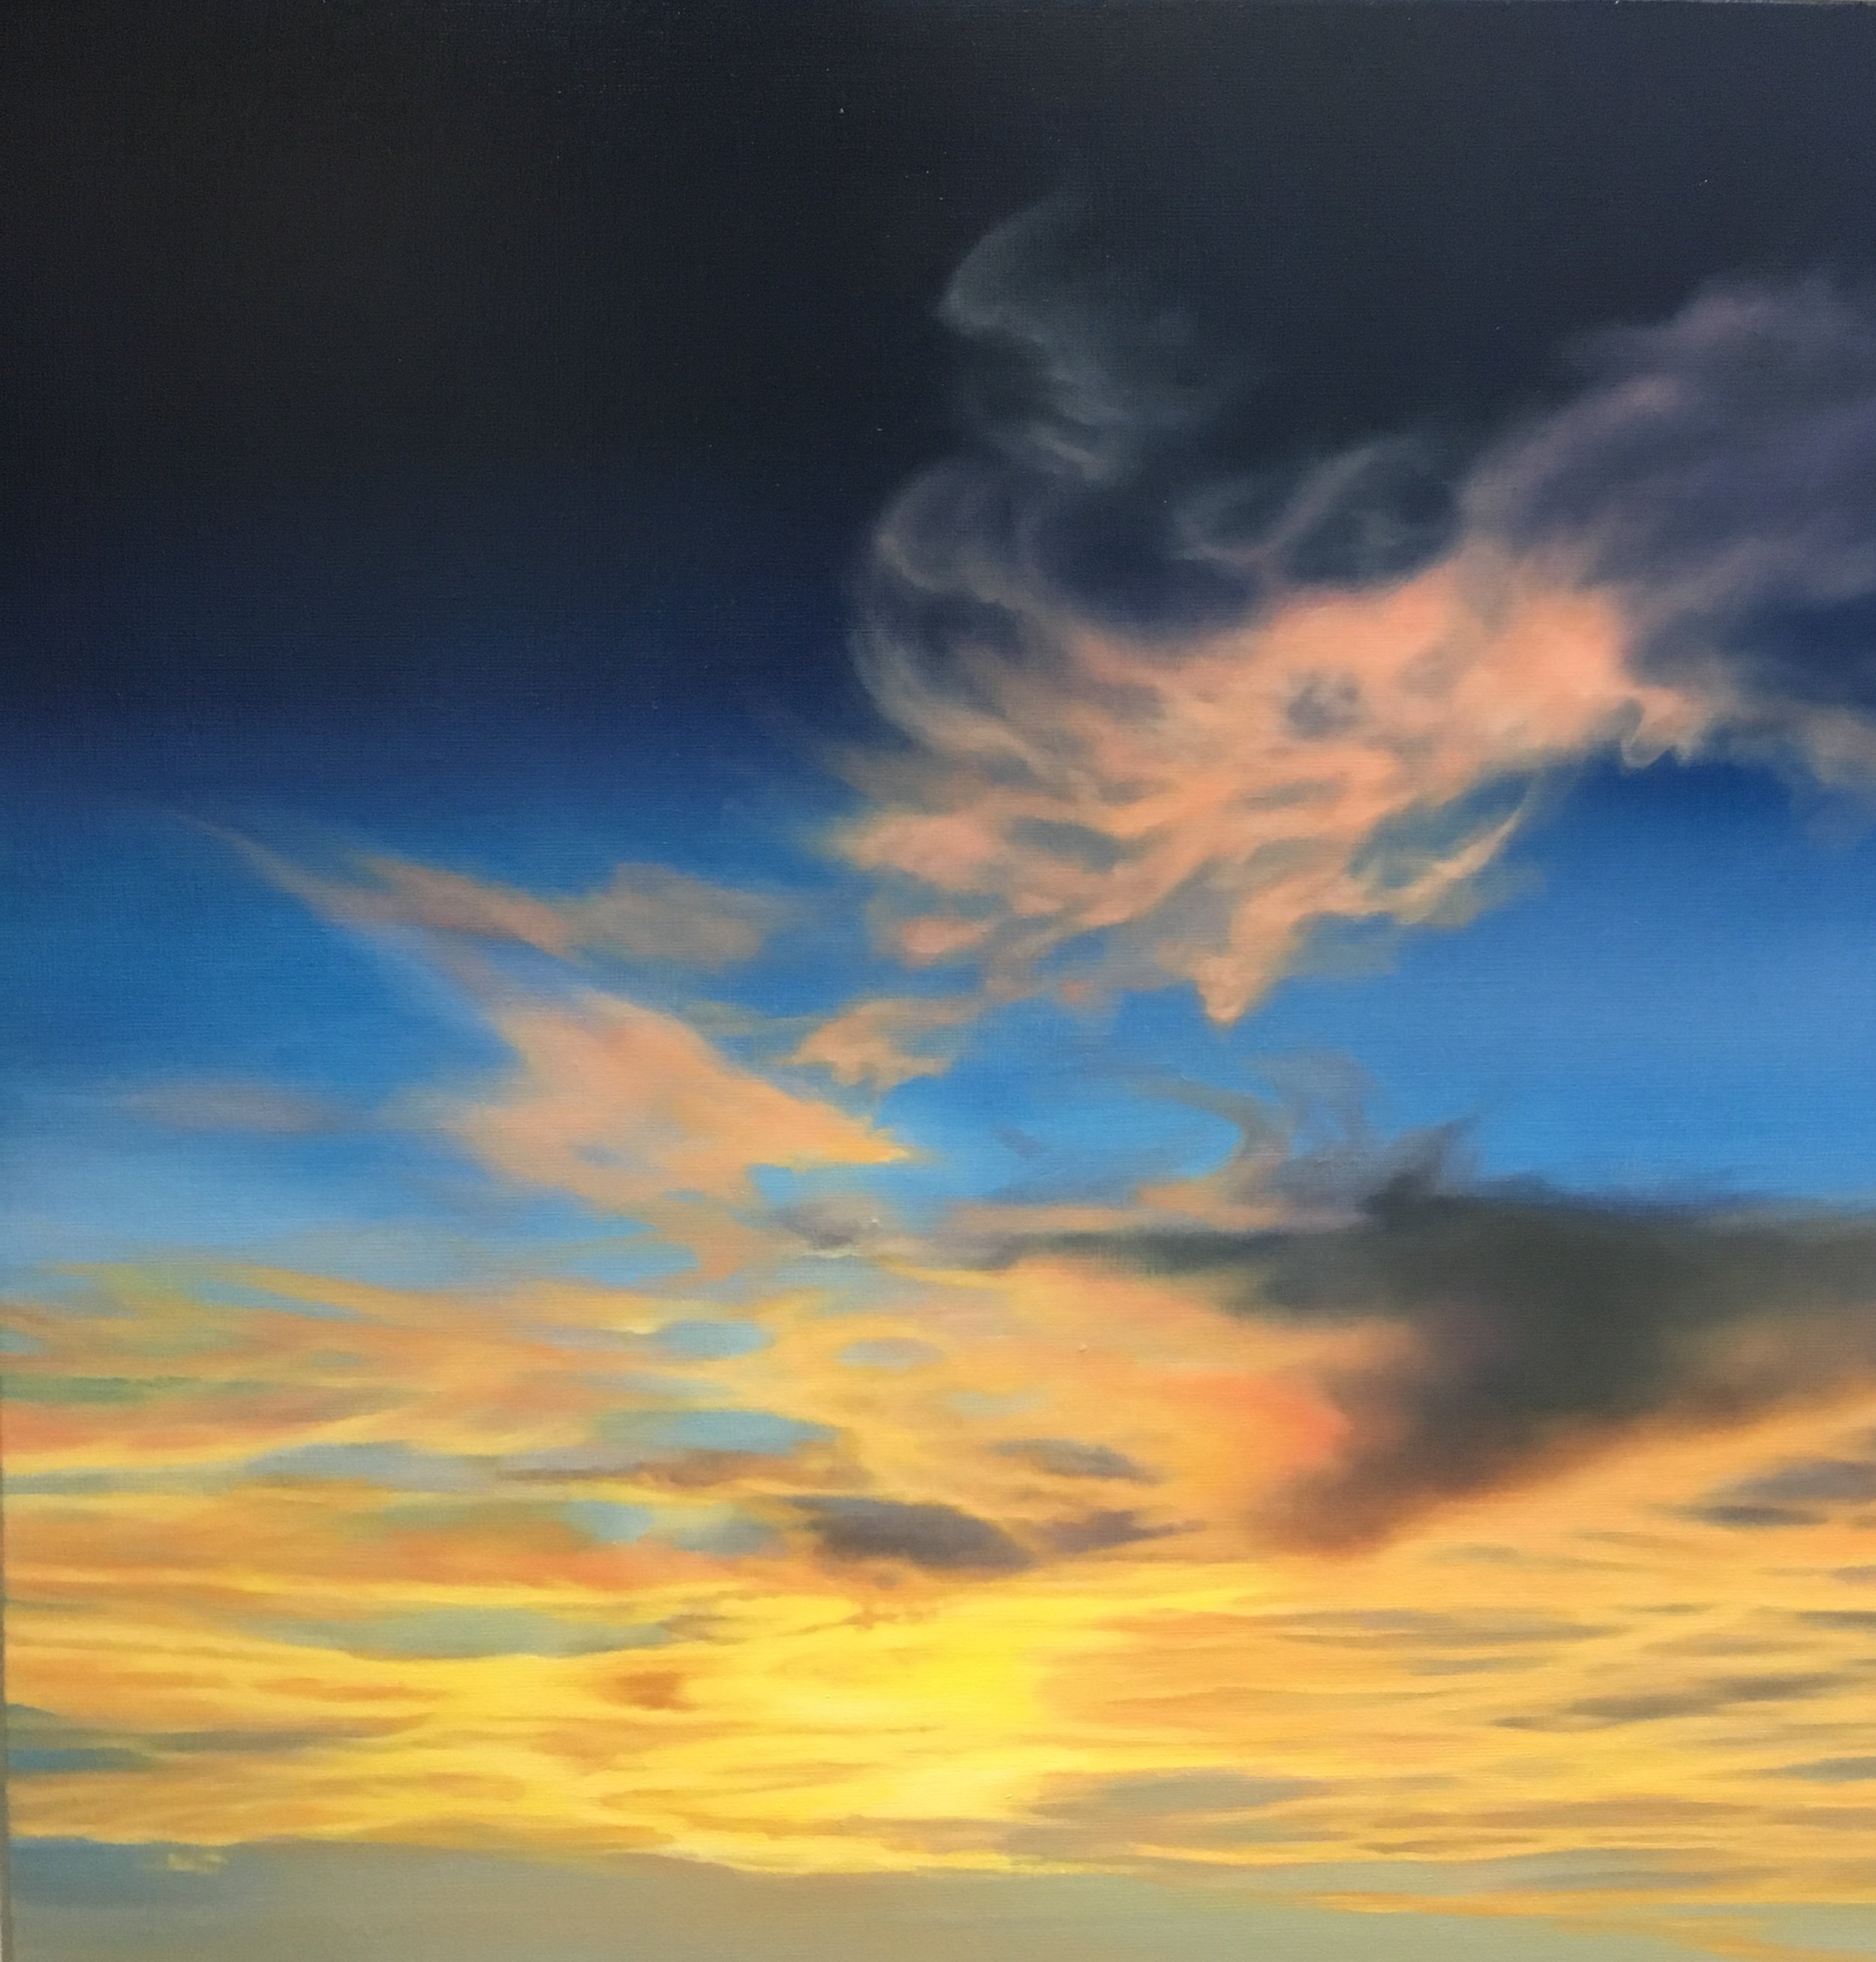  Carin Wagner │ Sky XI │ Oil on Linen │ 24 inches square or 61 cm square 